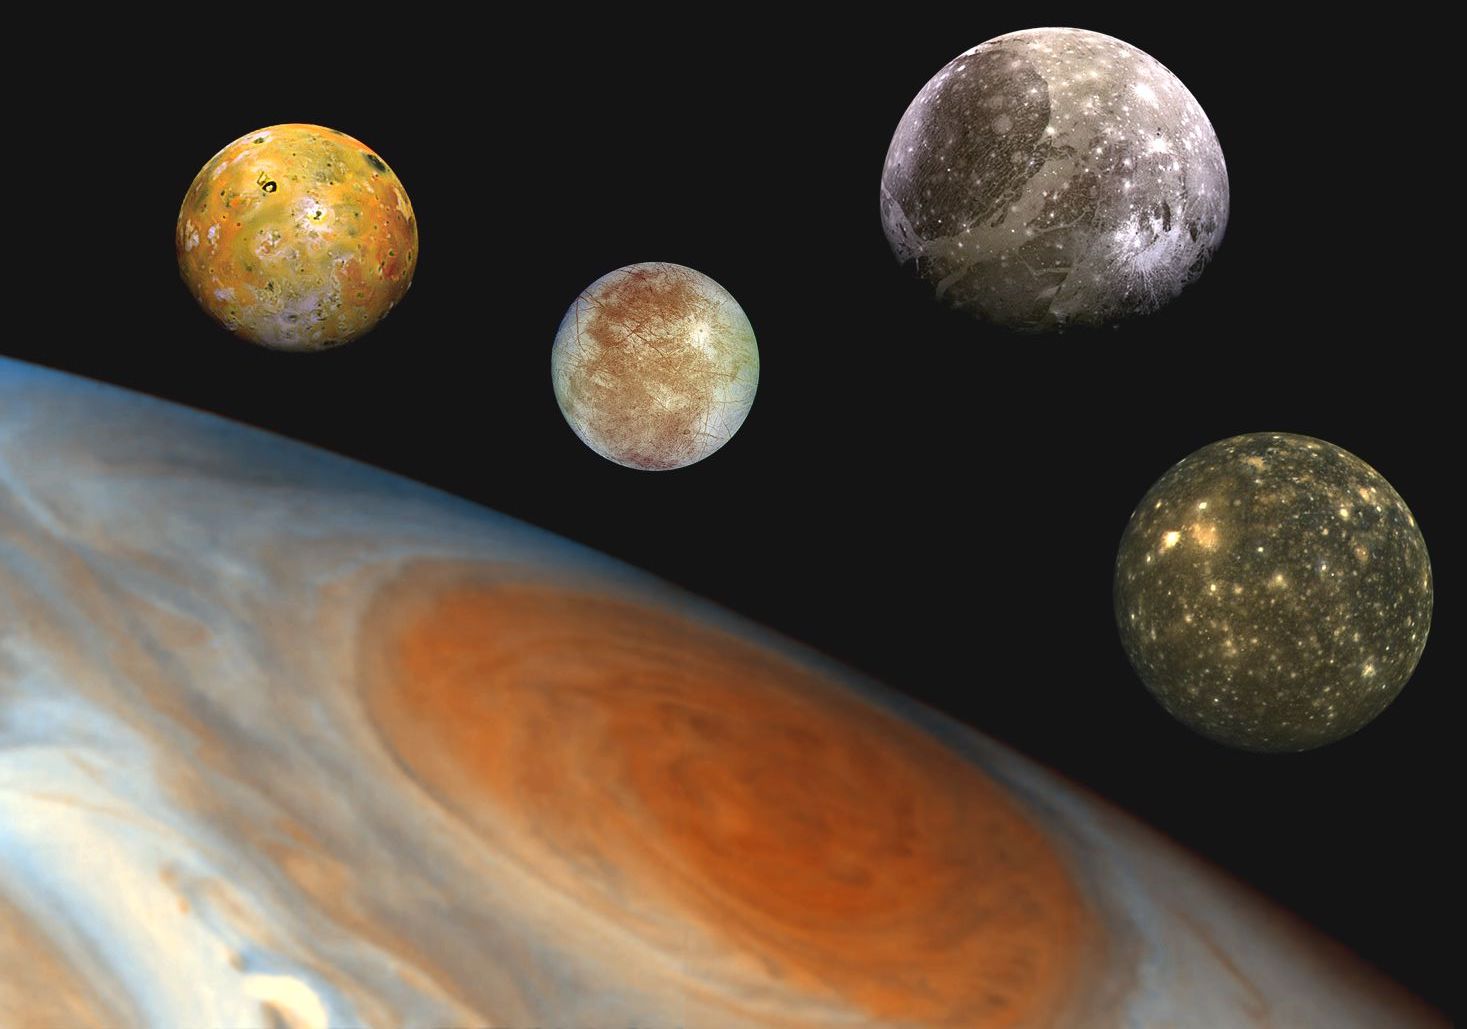 Jupiter’s moons are about to get JUICE’d for signs of life